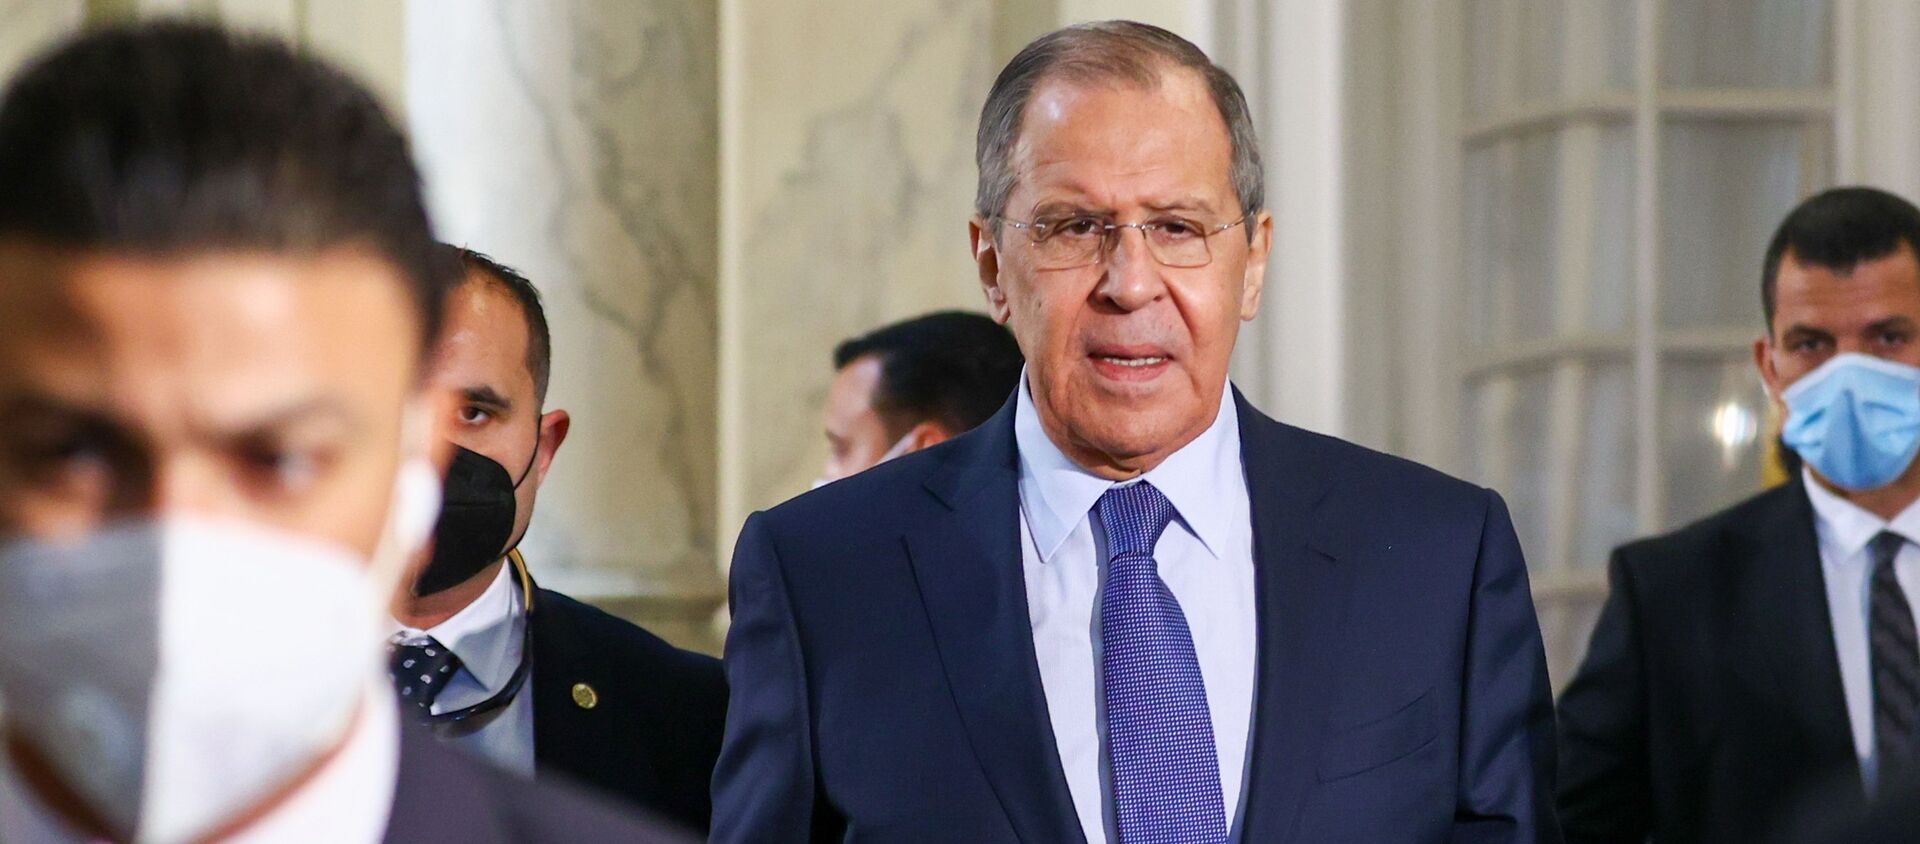 Russian Foreign Minister Sergei Lavrov (center) during his visit to Cairo, Egypt. Monday, 12 April, 2021. - Sputnik International, 1920, 16.04.2021